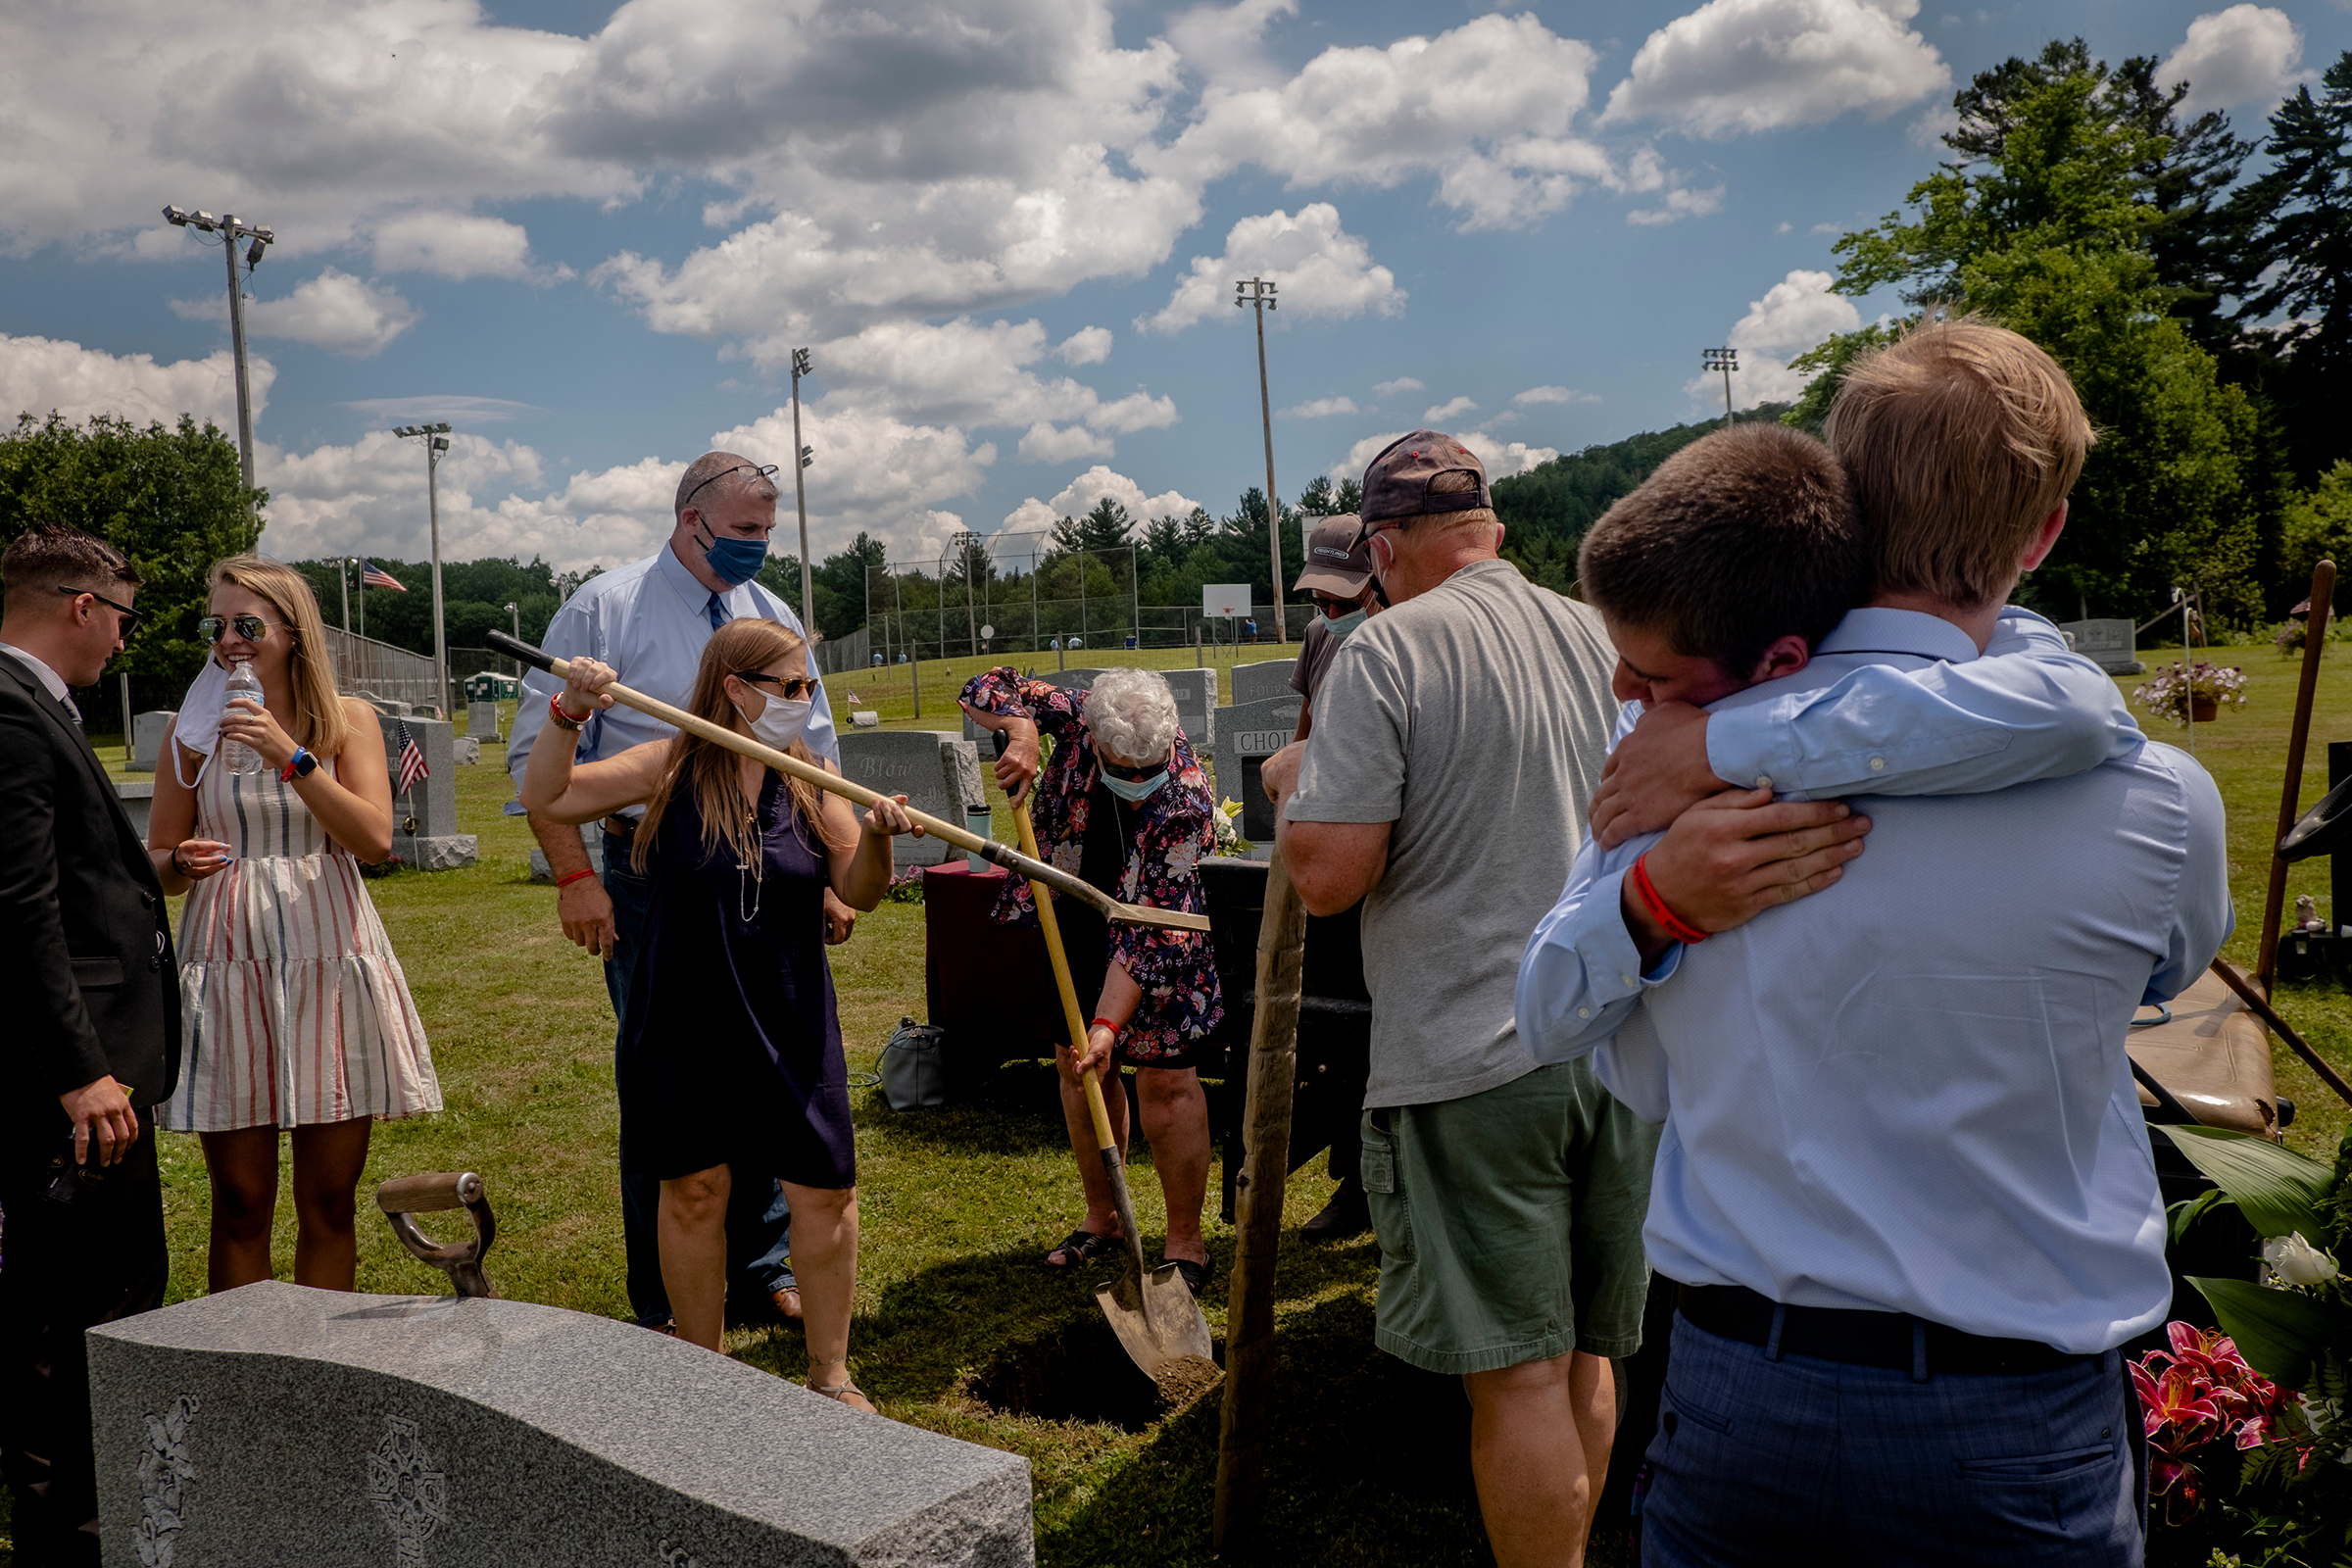 The family and friends of Jefrey Scott Cameron, who died of an accidental overdose earlier this year, at his burial in Barre, Vt., on July 18. By this time, more than 40 states had seen increases in overdoses since the onset of the pandemic in the U.S. (Hilary Swift—The New York Times/Redux)